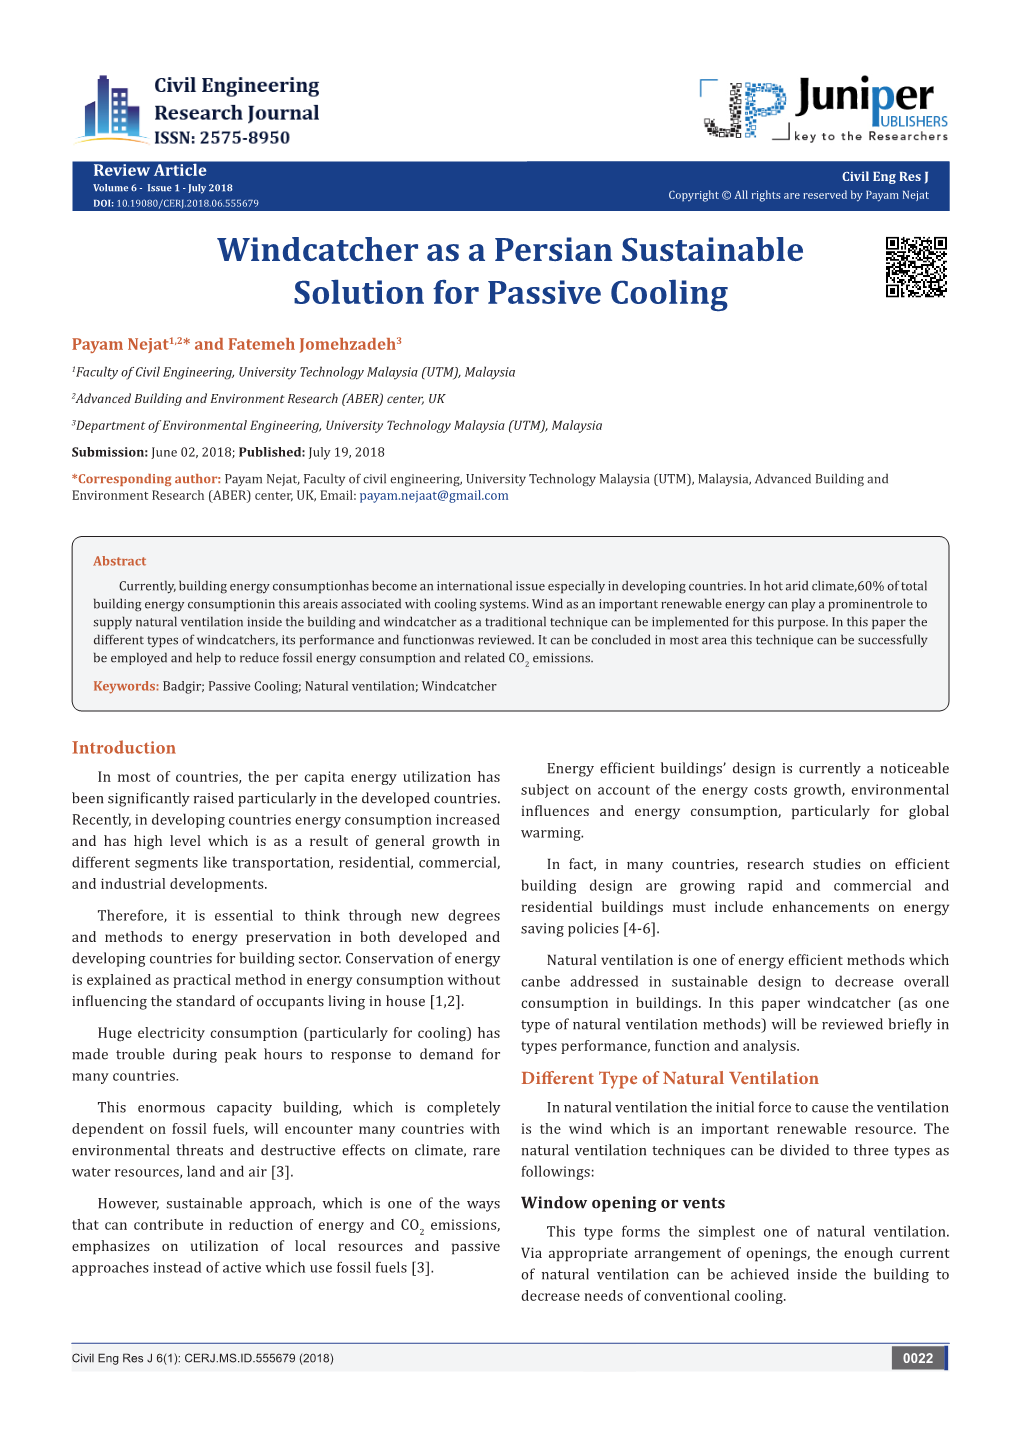 Windcatcher As a Persian Sustainable Solution for Passive Cooling